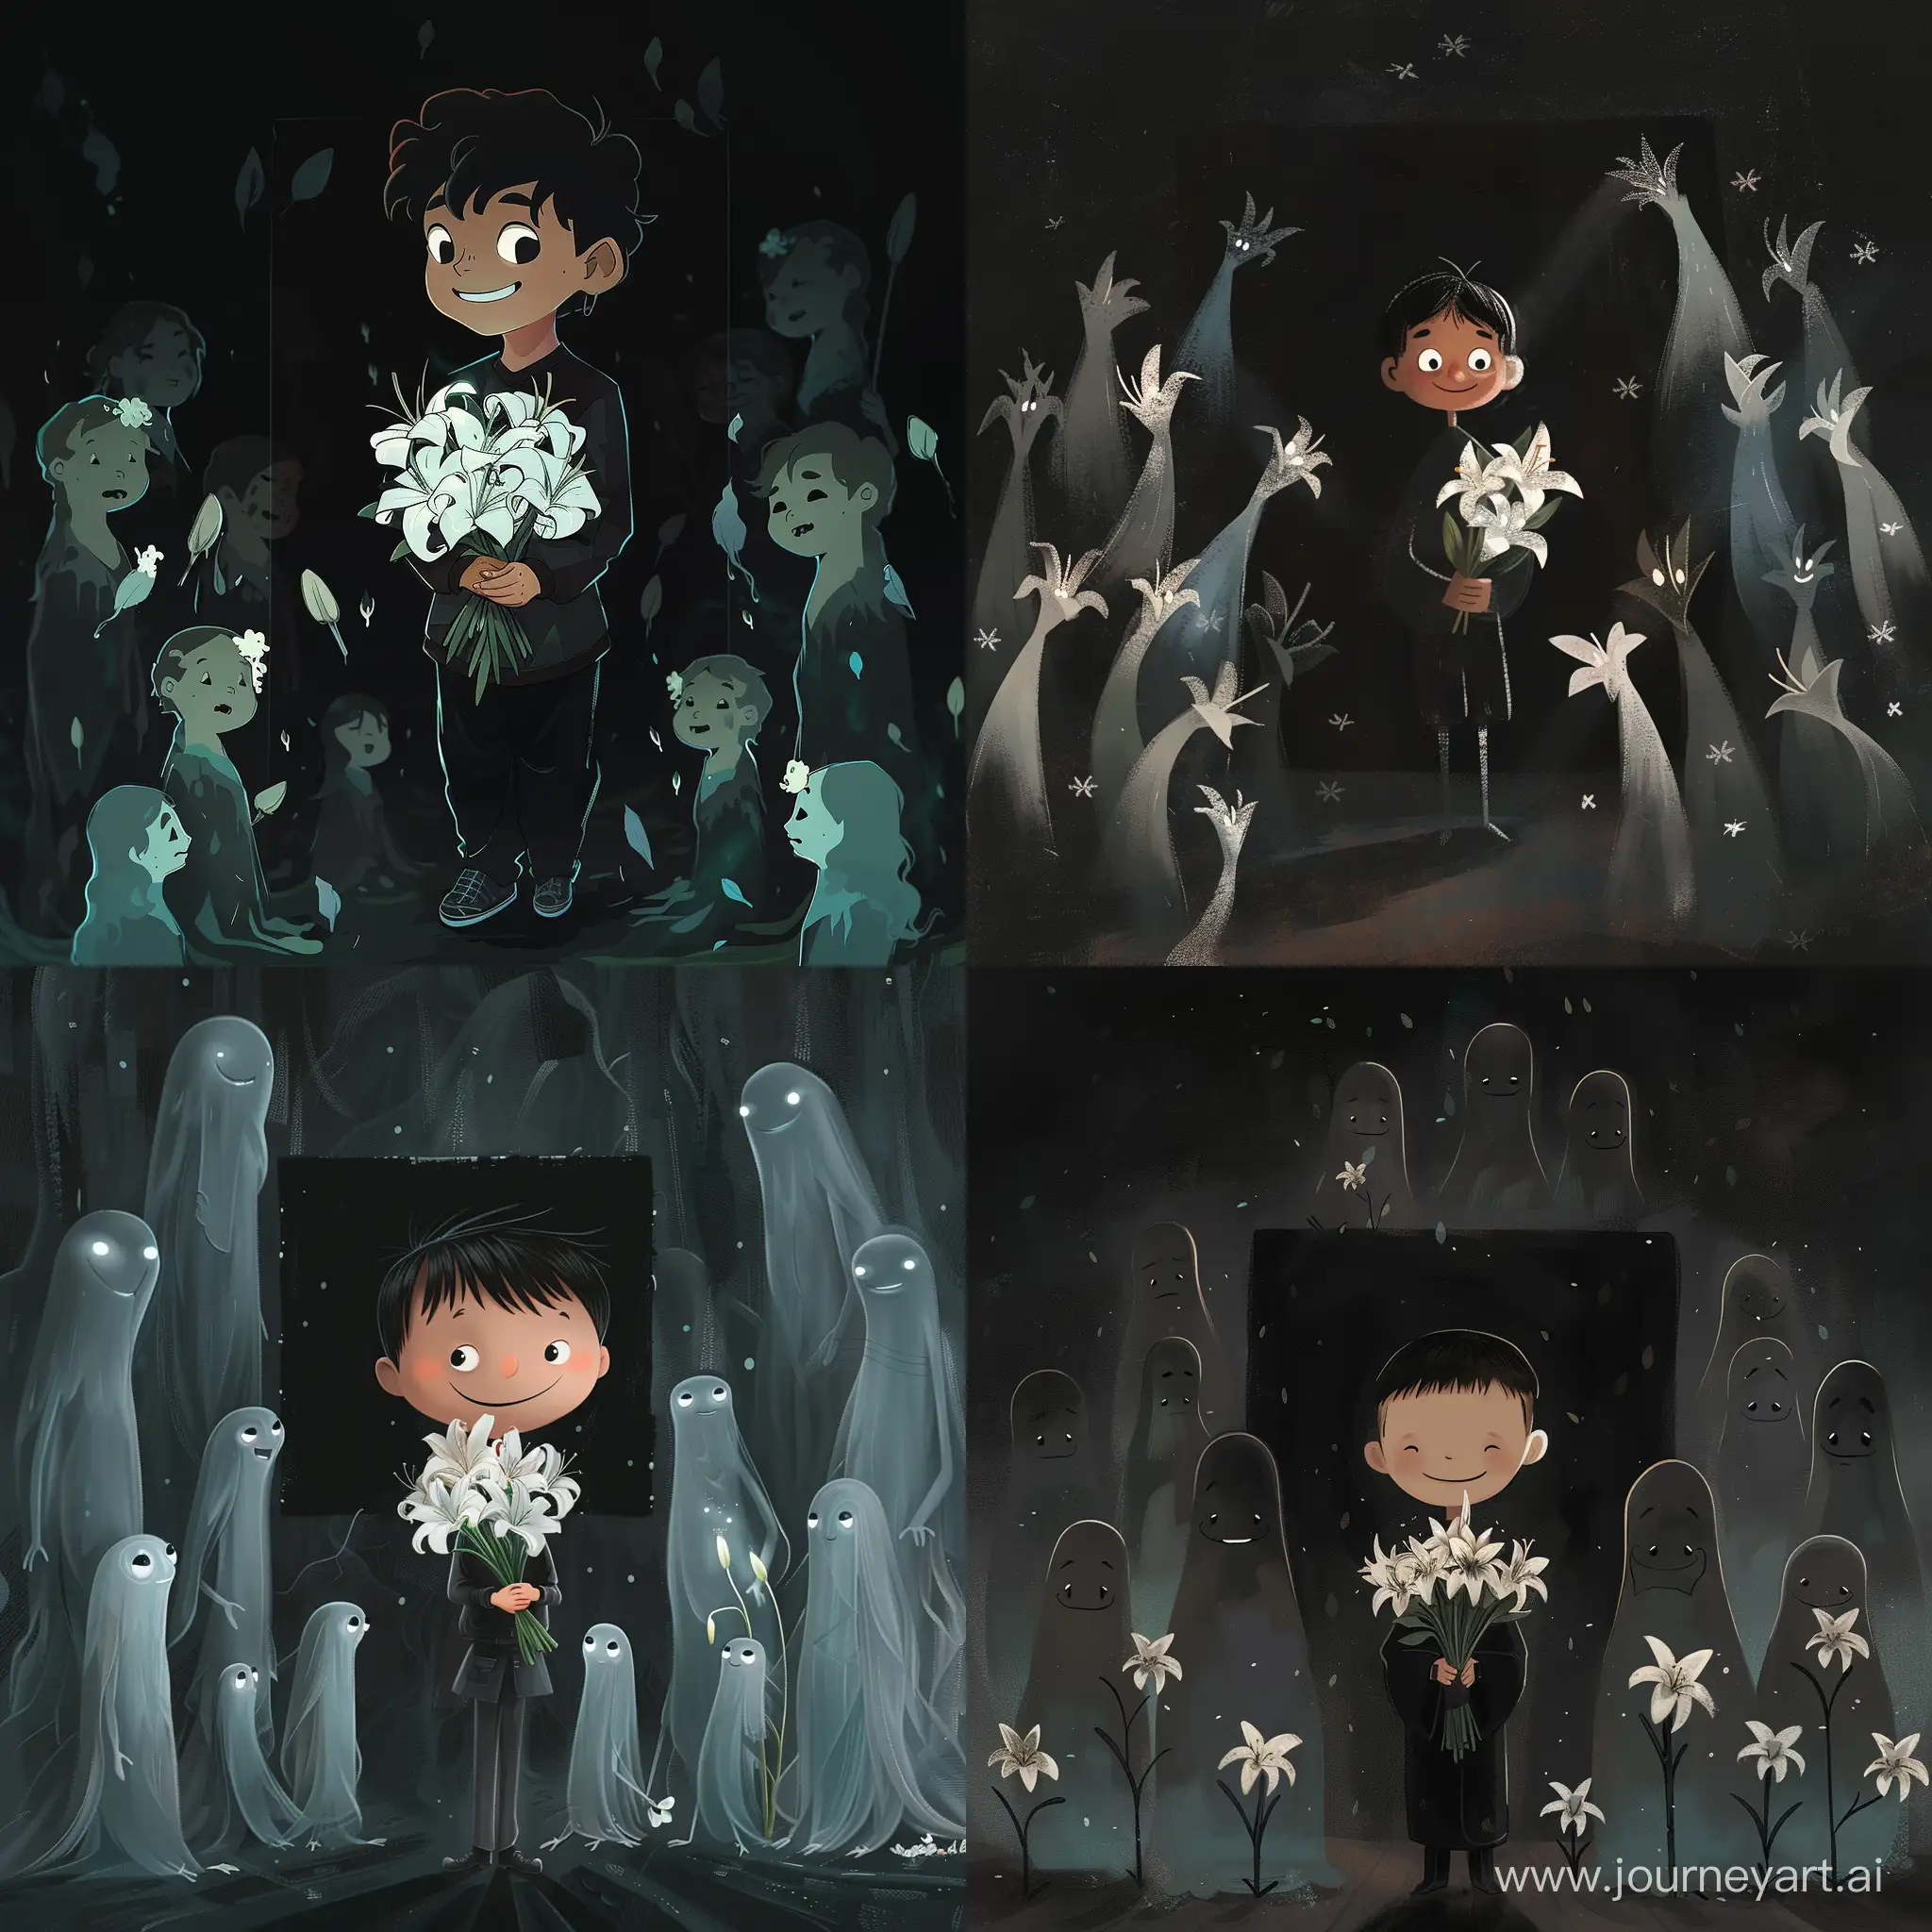 A boy stood holding a bouquet of white lilies, wearing a black outfit, with a smile on his face. All around stood spirits. In the black square room